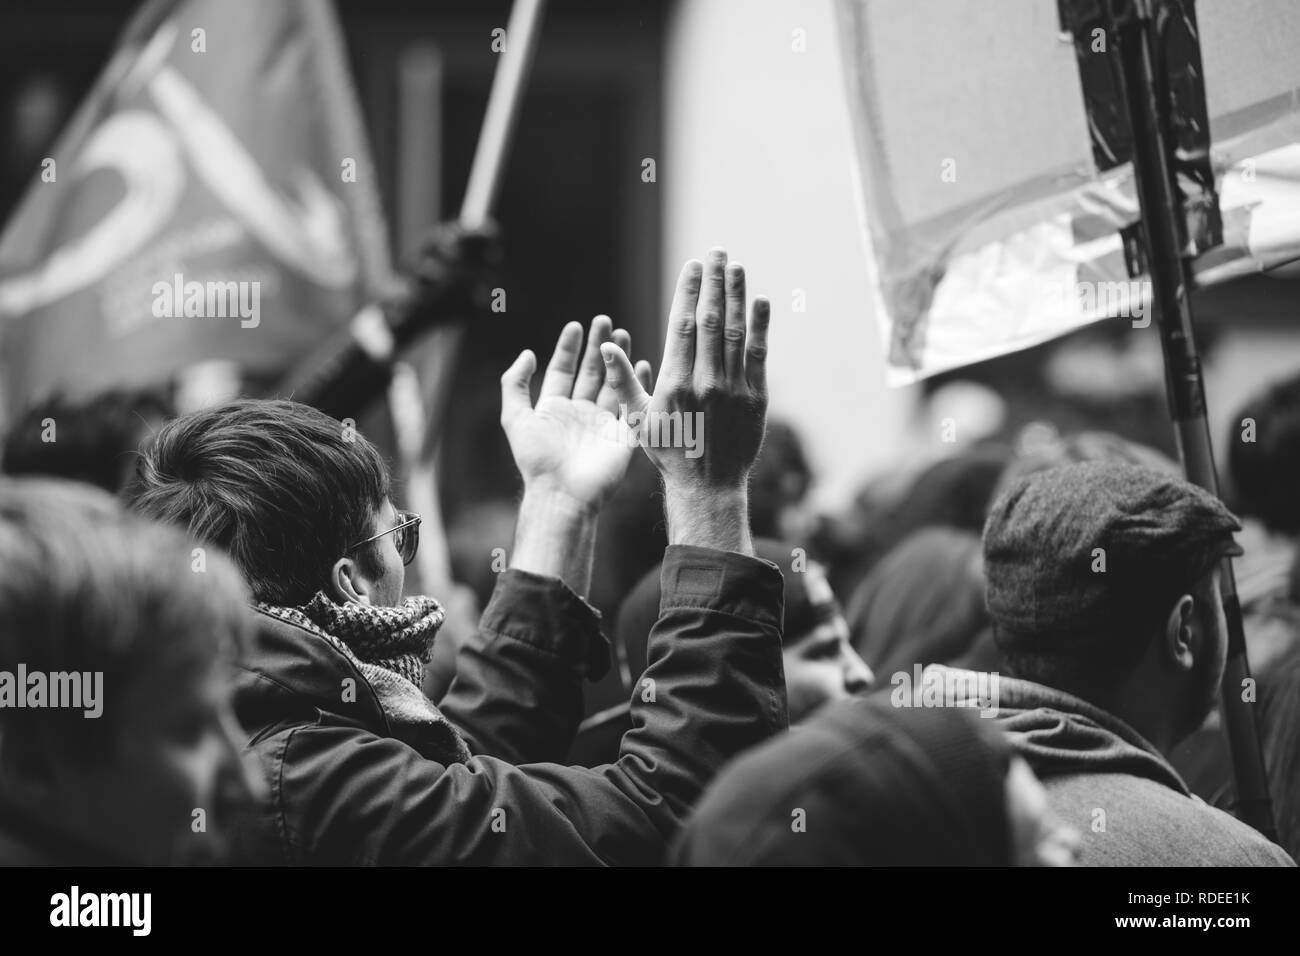 STRASBOURG, FRANCE  - MAR 22, 2018: Making noise hands demonstration protest against Macron French government string of reforms, mutiple trade unions called public workers to strike - black and white   Stock Photo